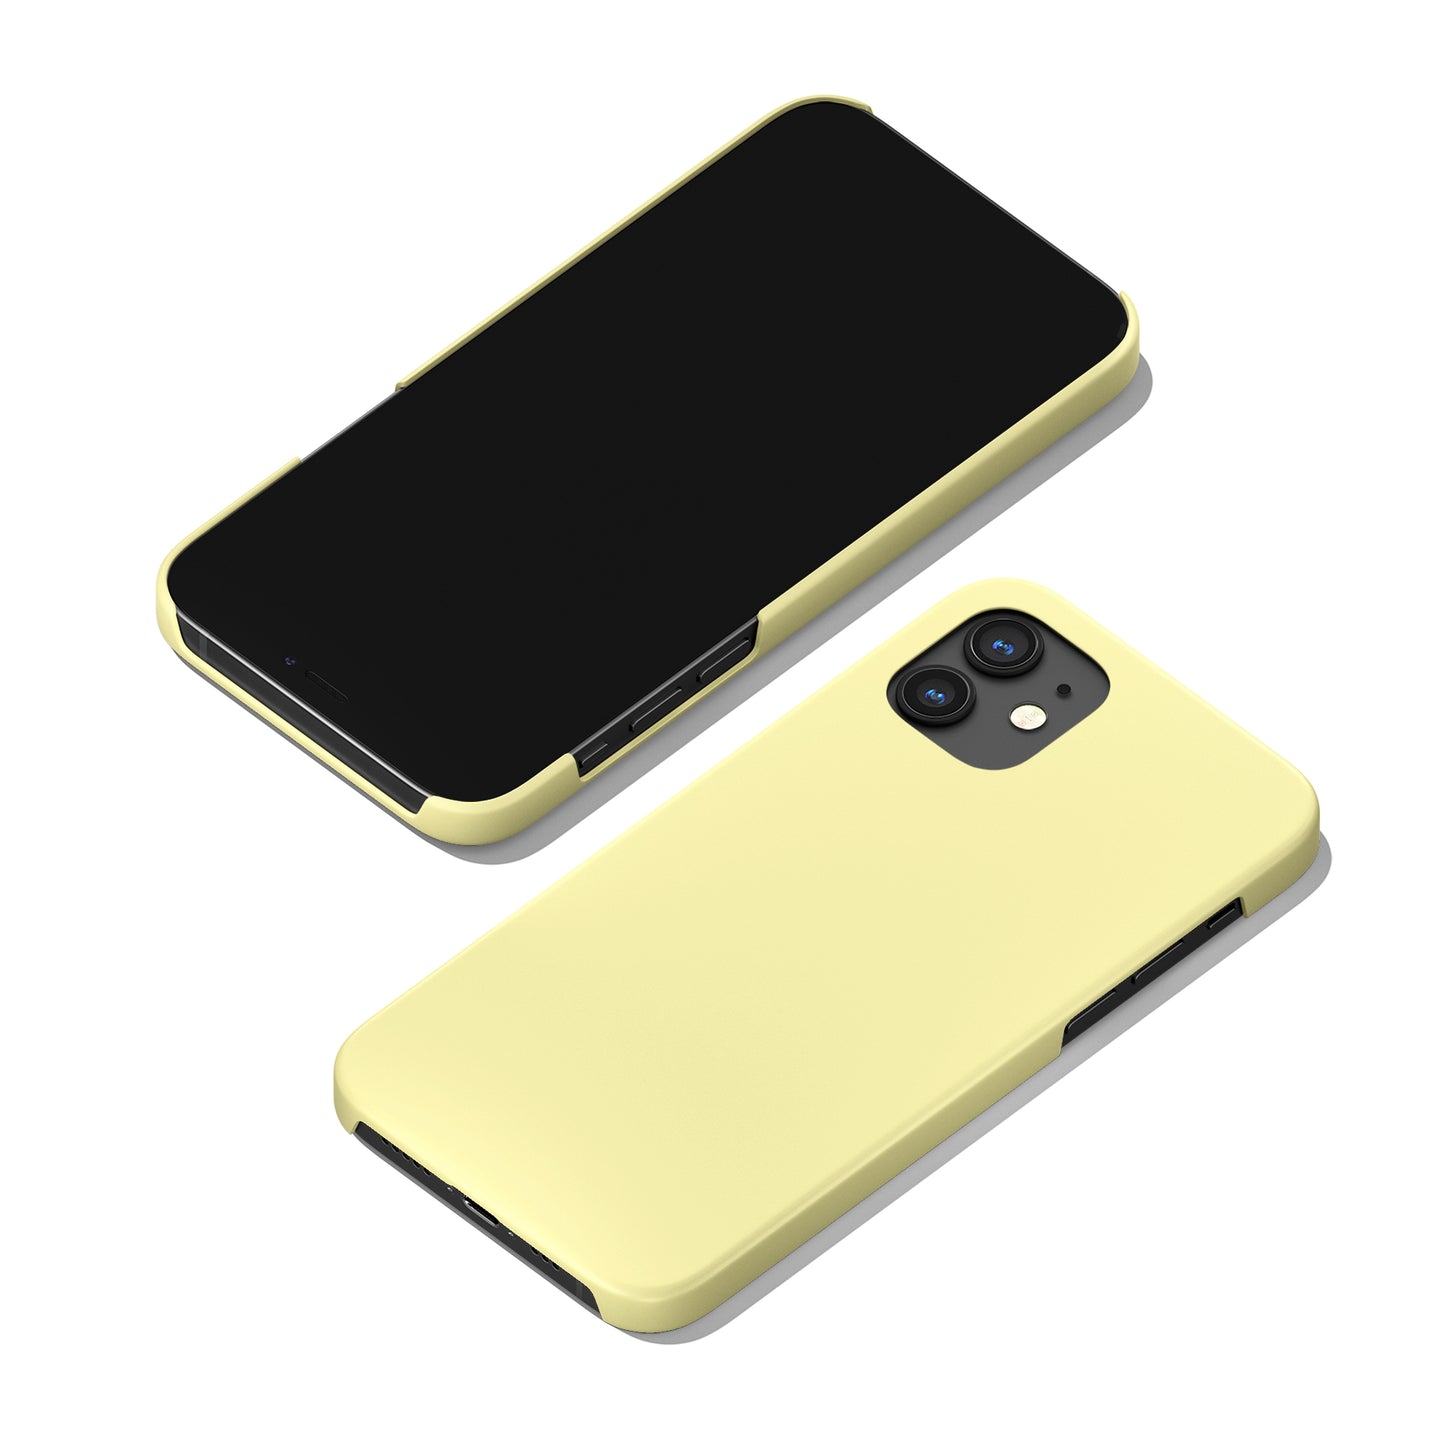 Canary Yellow iPhone Case